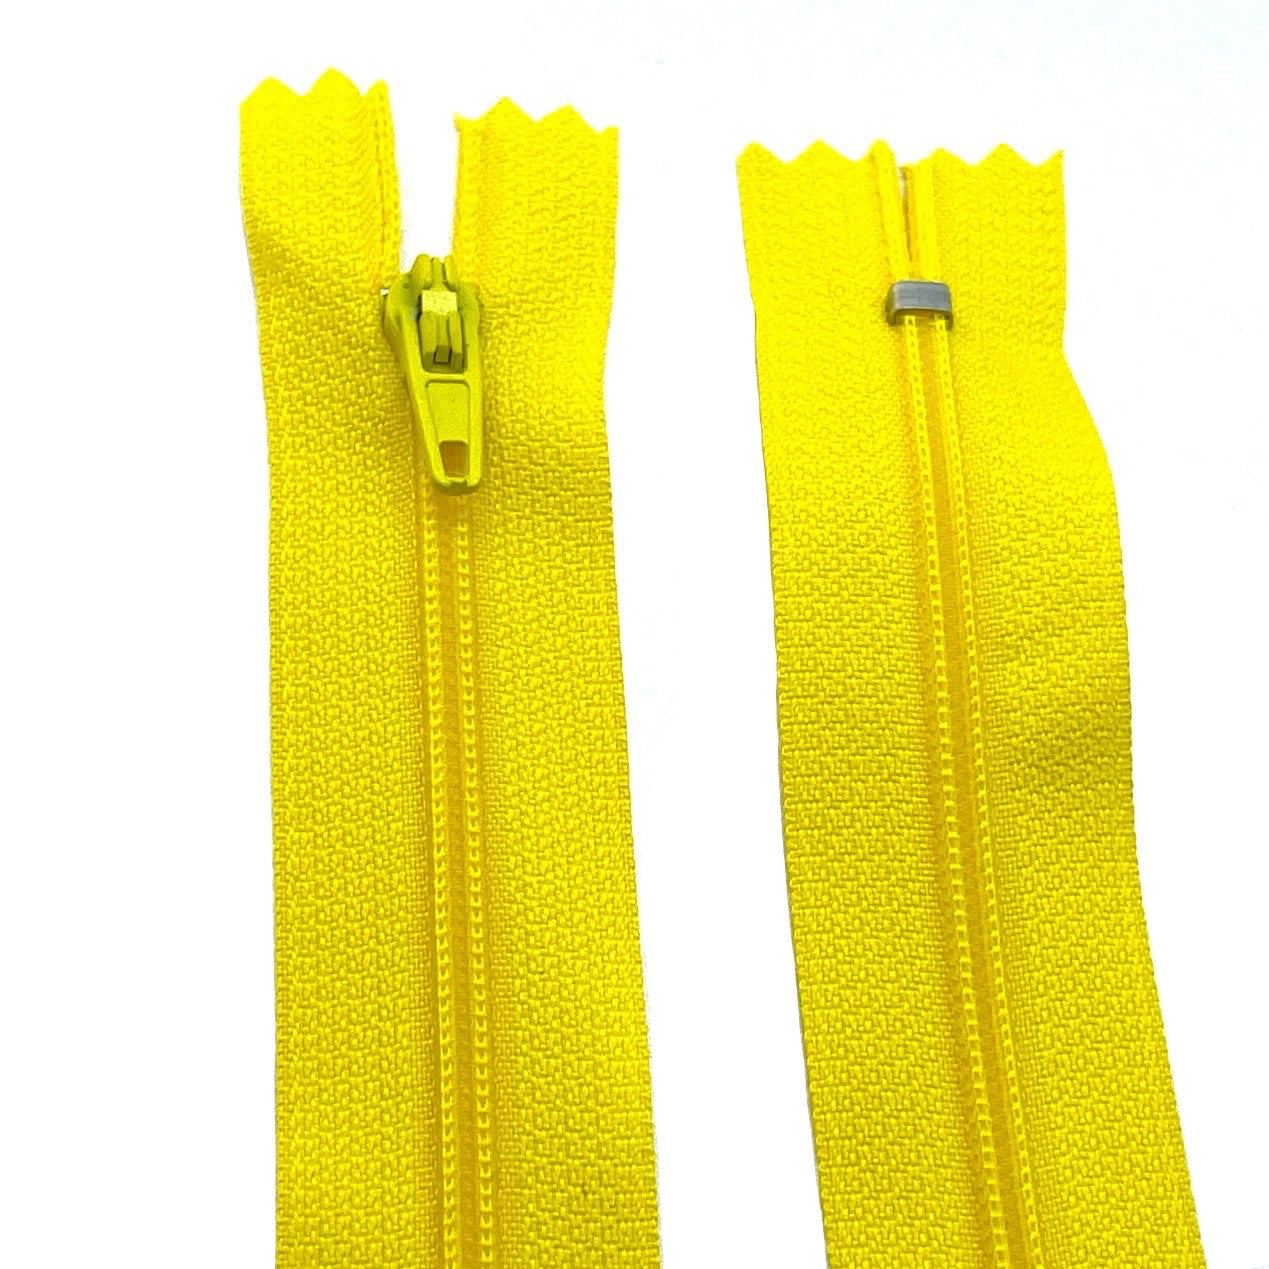 Photo of yellow nylon zips available in 25 colors and 5 sizes. Excellent quality zippers for craft and dressmaking purposes. Perfect for dresses, skirts, trousers, bags, purses, cushions, and numerous other projects. So many possibilities, so little time!